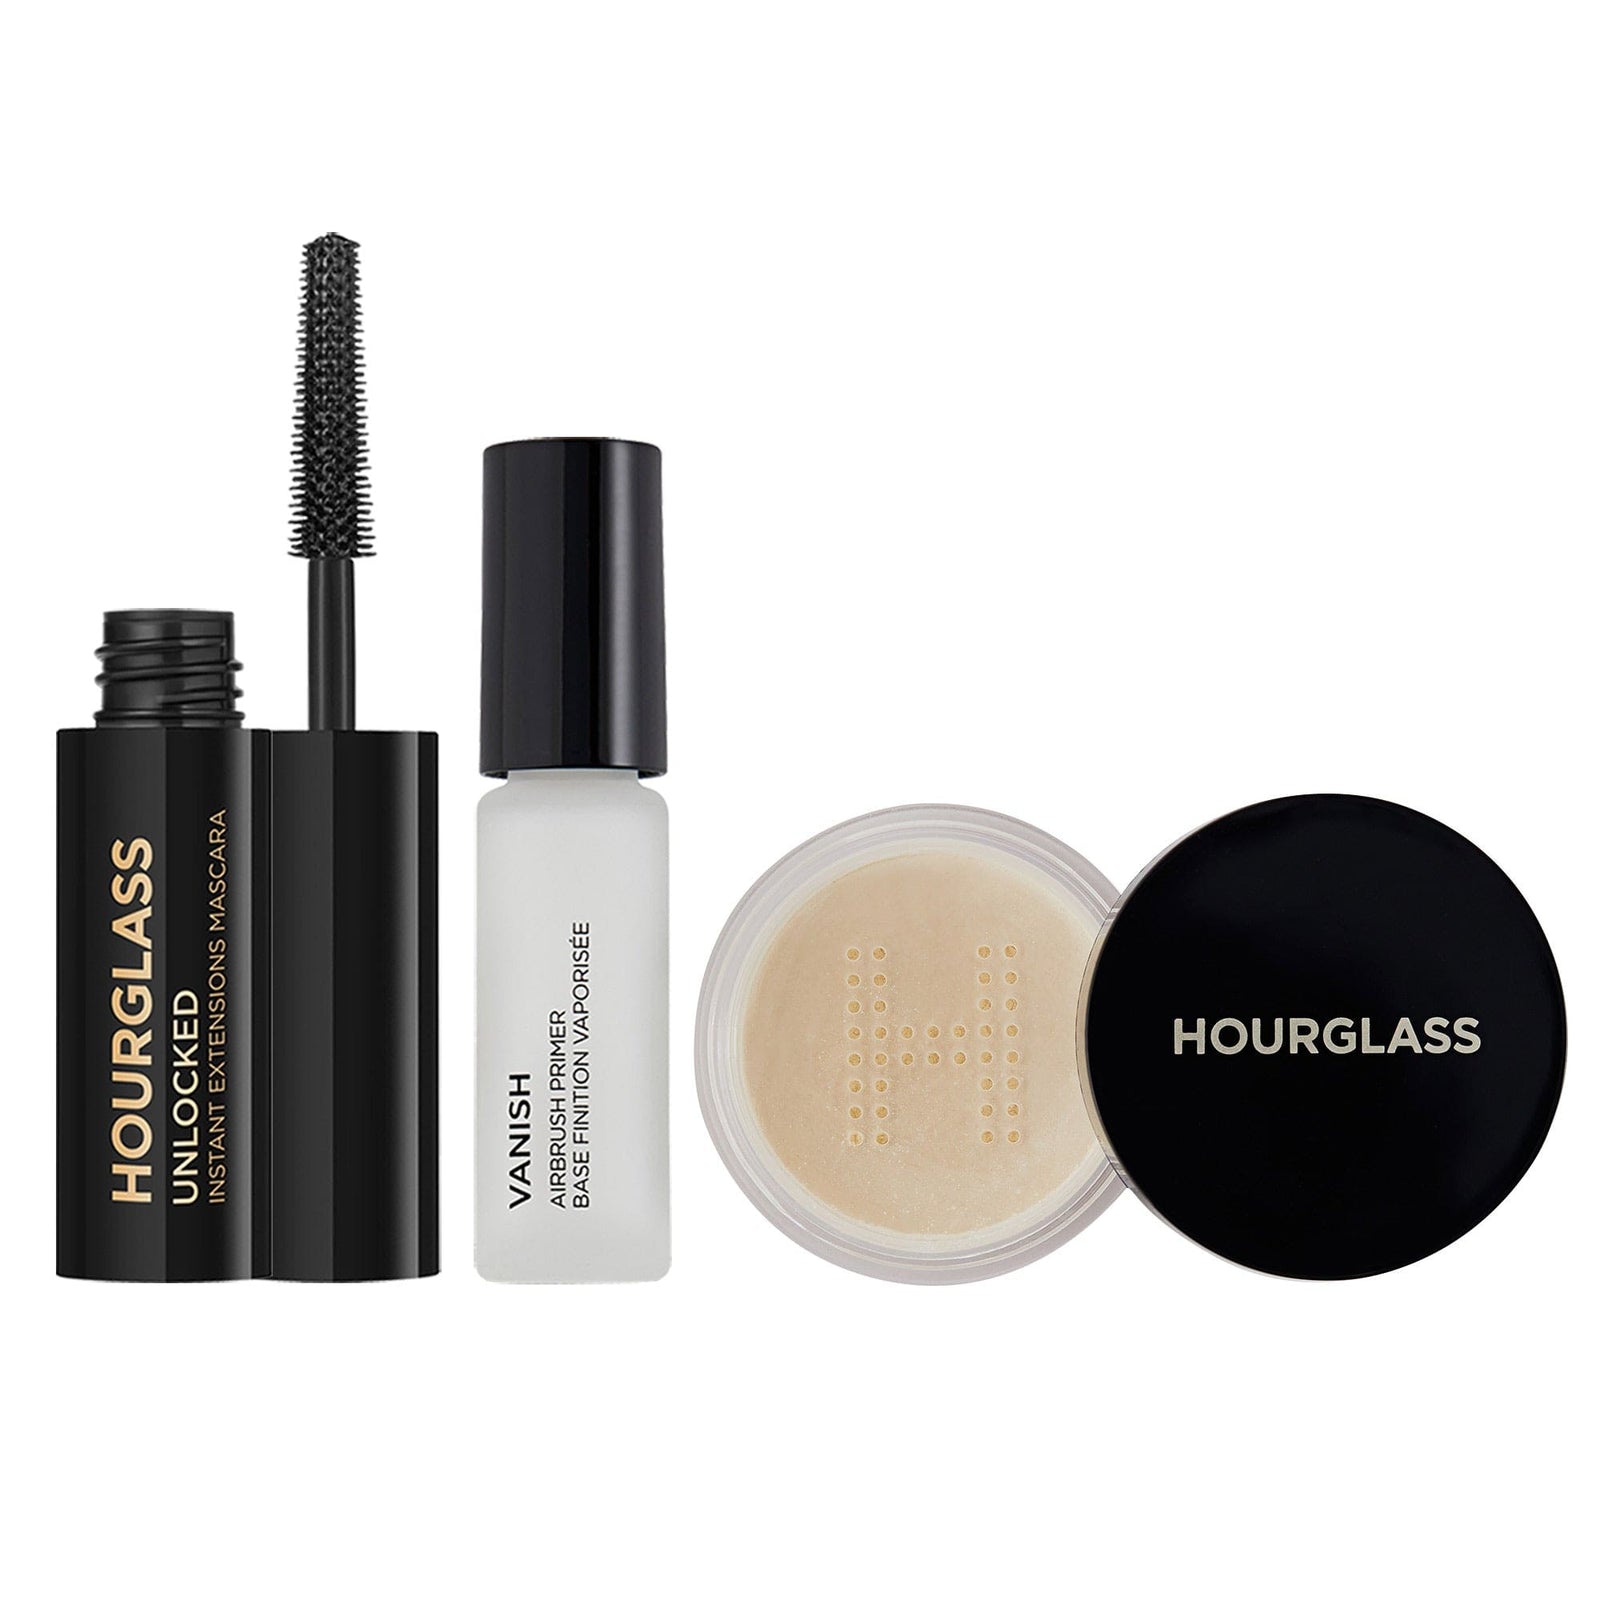 Hourglass Free Gift with Purchase